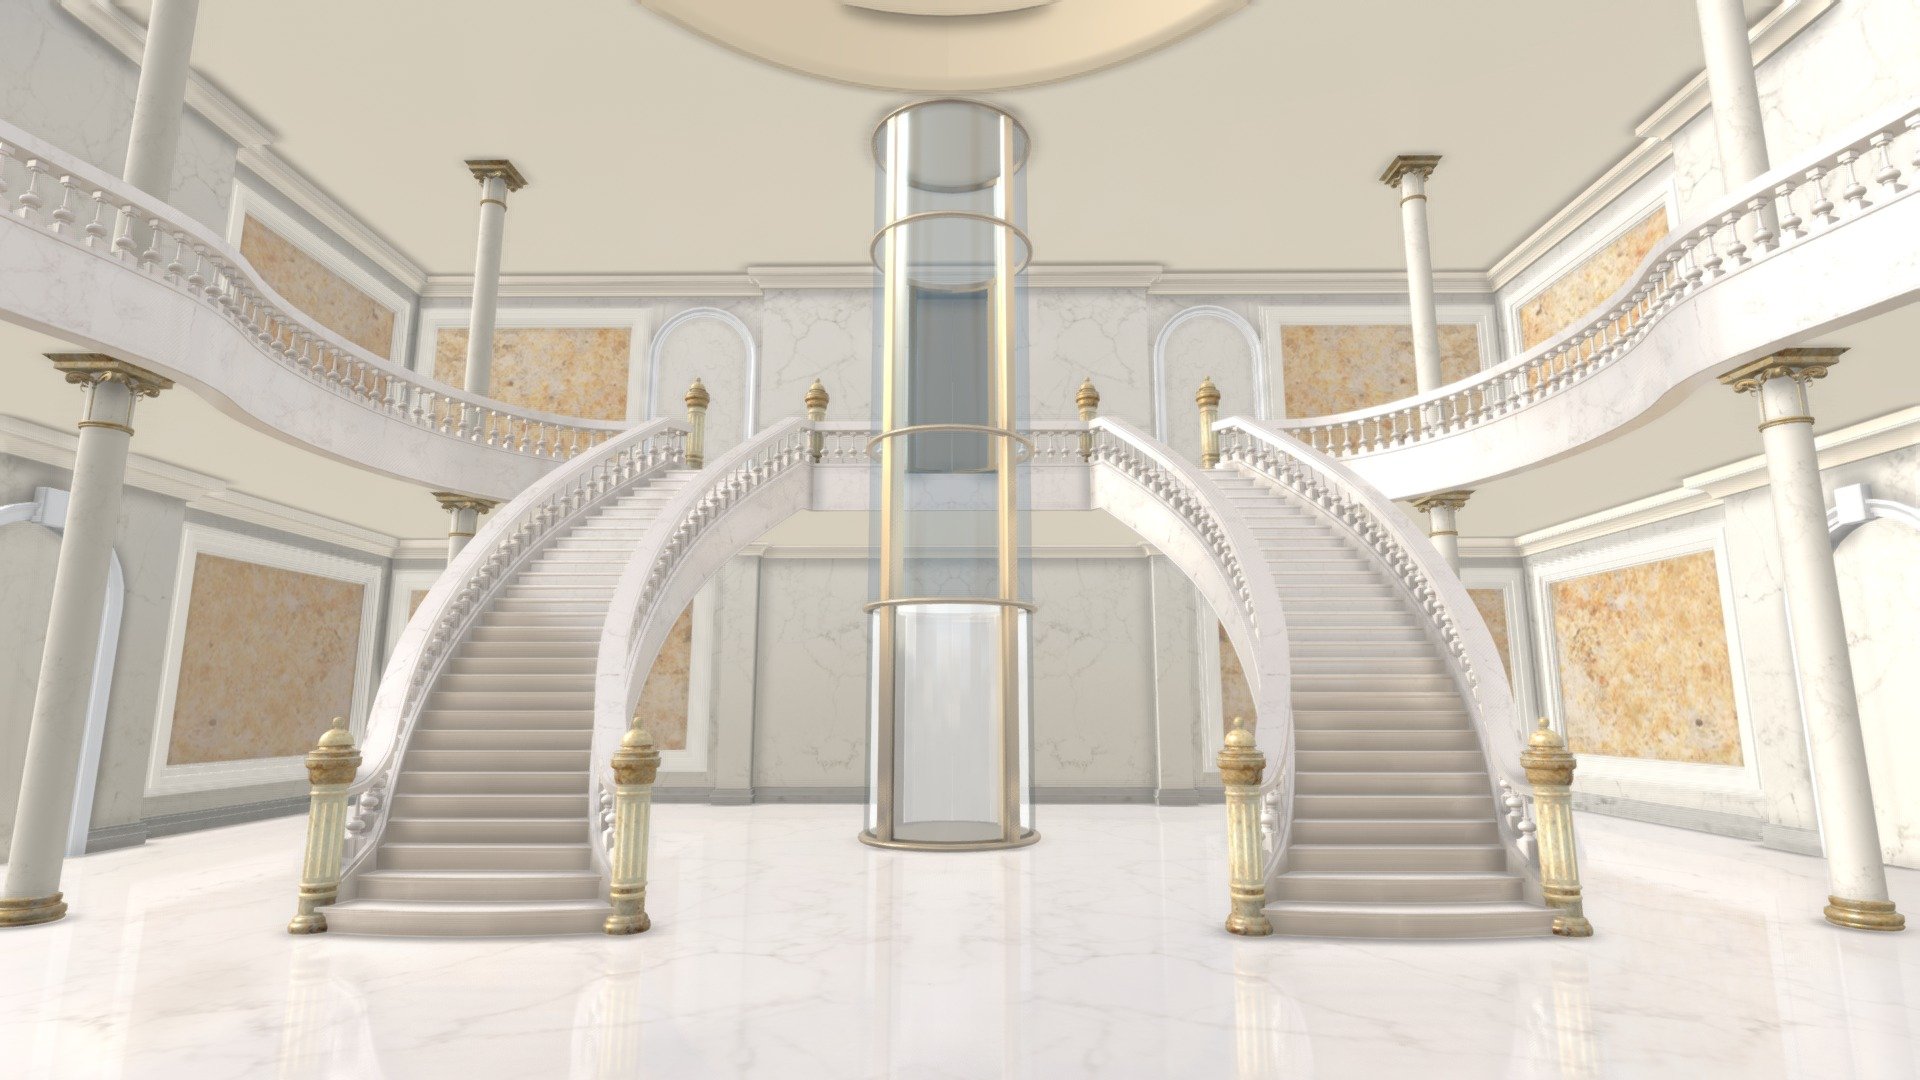 Staircase Art Gallery, scene has faked lighting.
Original files are available.
Its models and UVs are symmetrical.
FBX file size : 9.36MB

Click on the link to see more models : https://sketchfab.com/GbehnamG/store

If you need customized 3d models , feel free to contact at: mr.gbehnamg@yahoo.com - VR Interior Staircase Art Gallery Dec. 2020 - Buy Royalty Free 3D model by BehNaM (@GbehnamG) 3d model